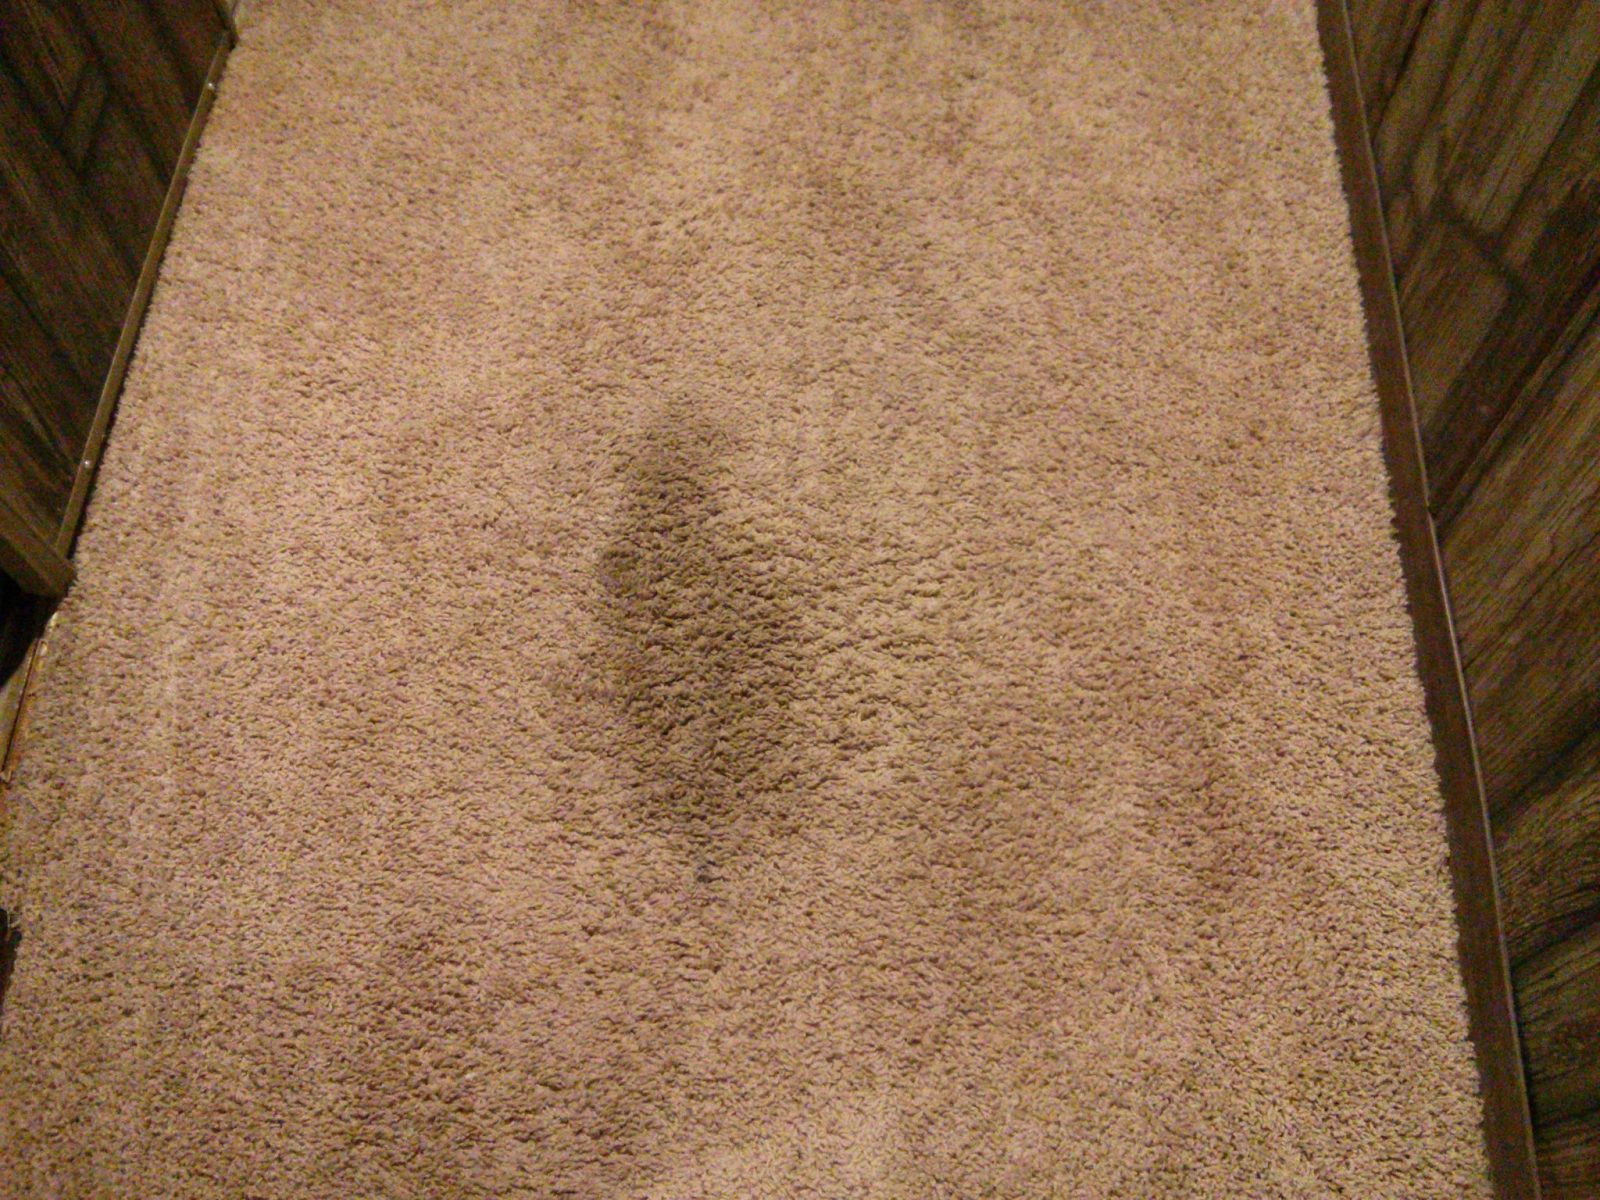 How to Repair Oil Stain and Candle Wax from the carpet?